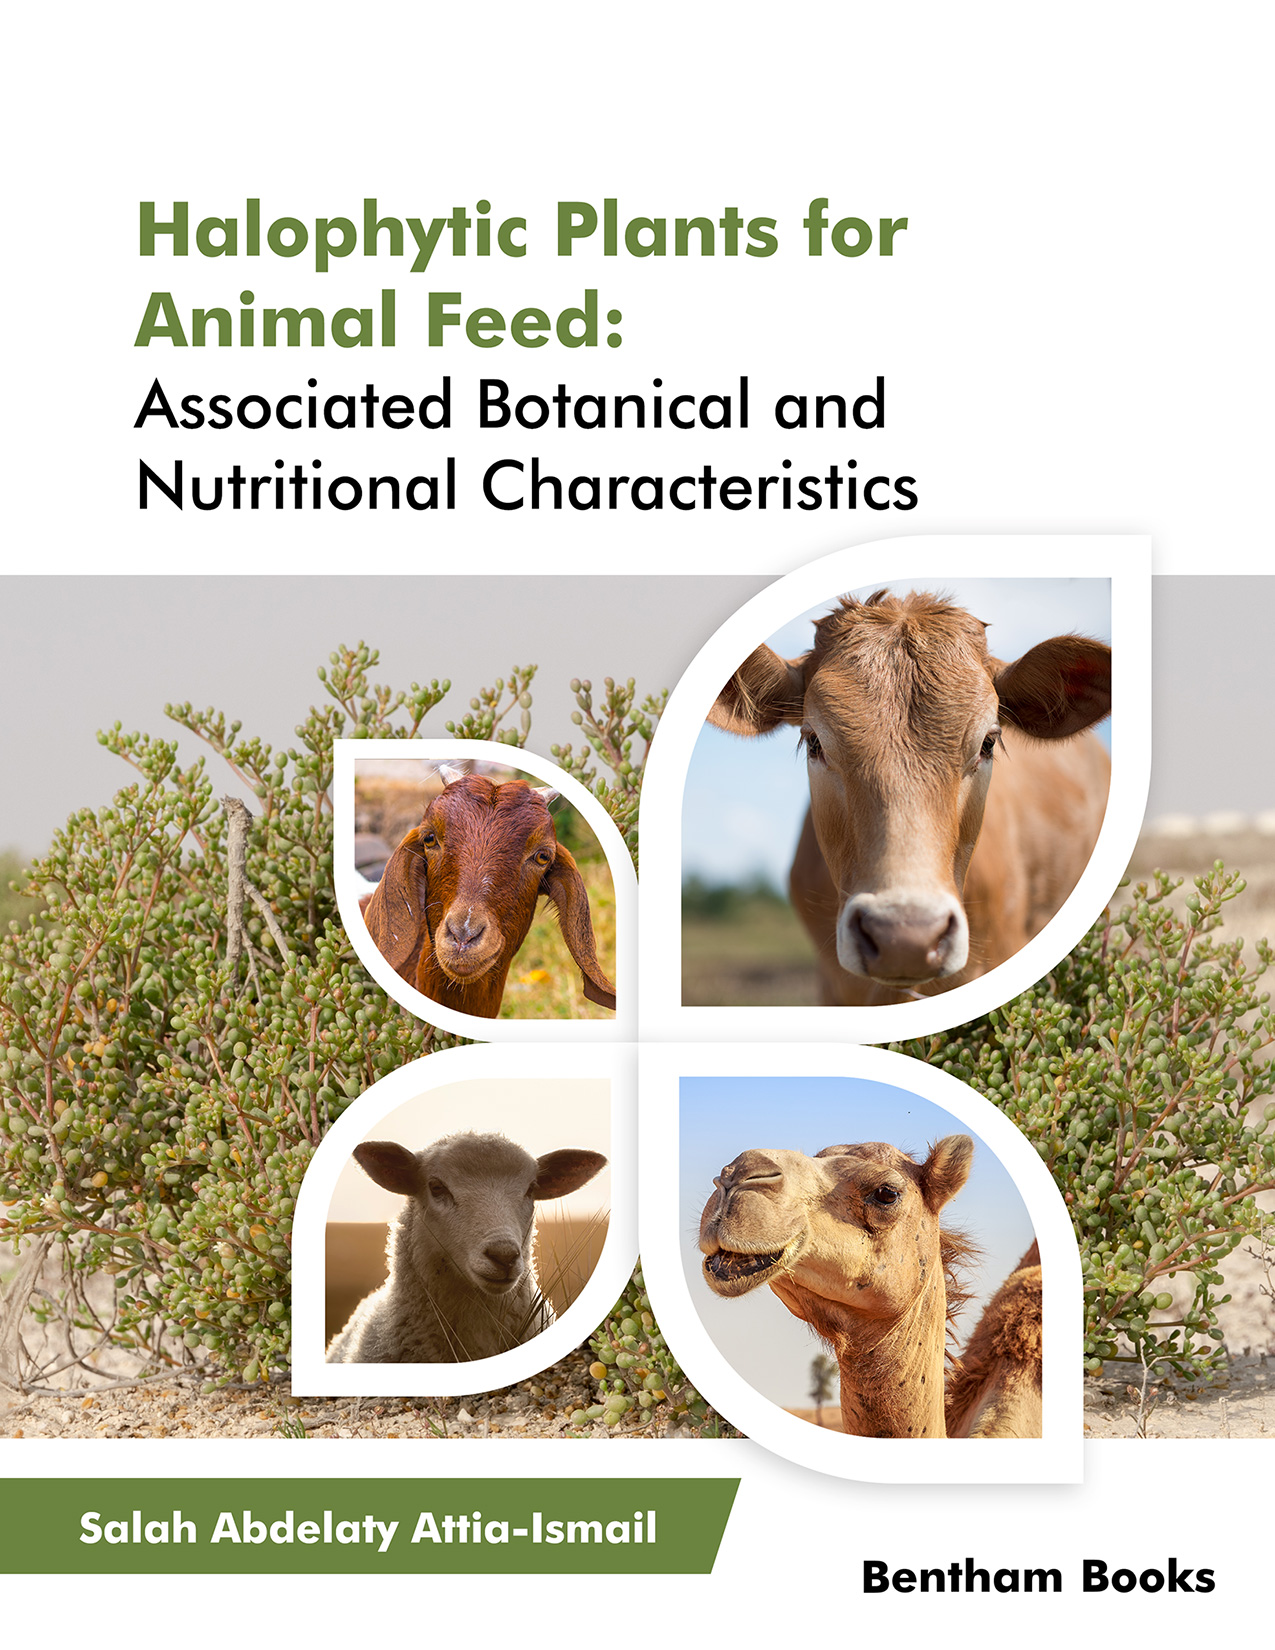 Halophytic Plants for Animal Feed: Associated Botanical and Nutritional Characteristics